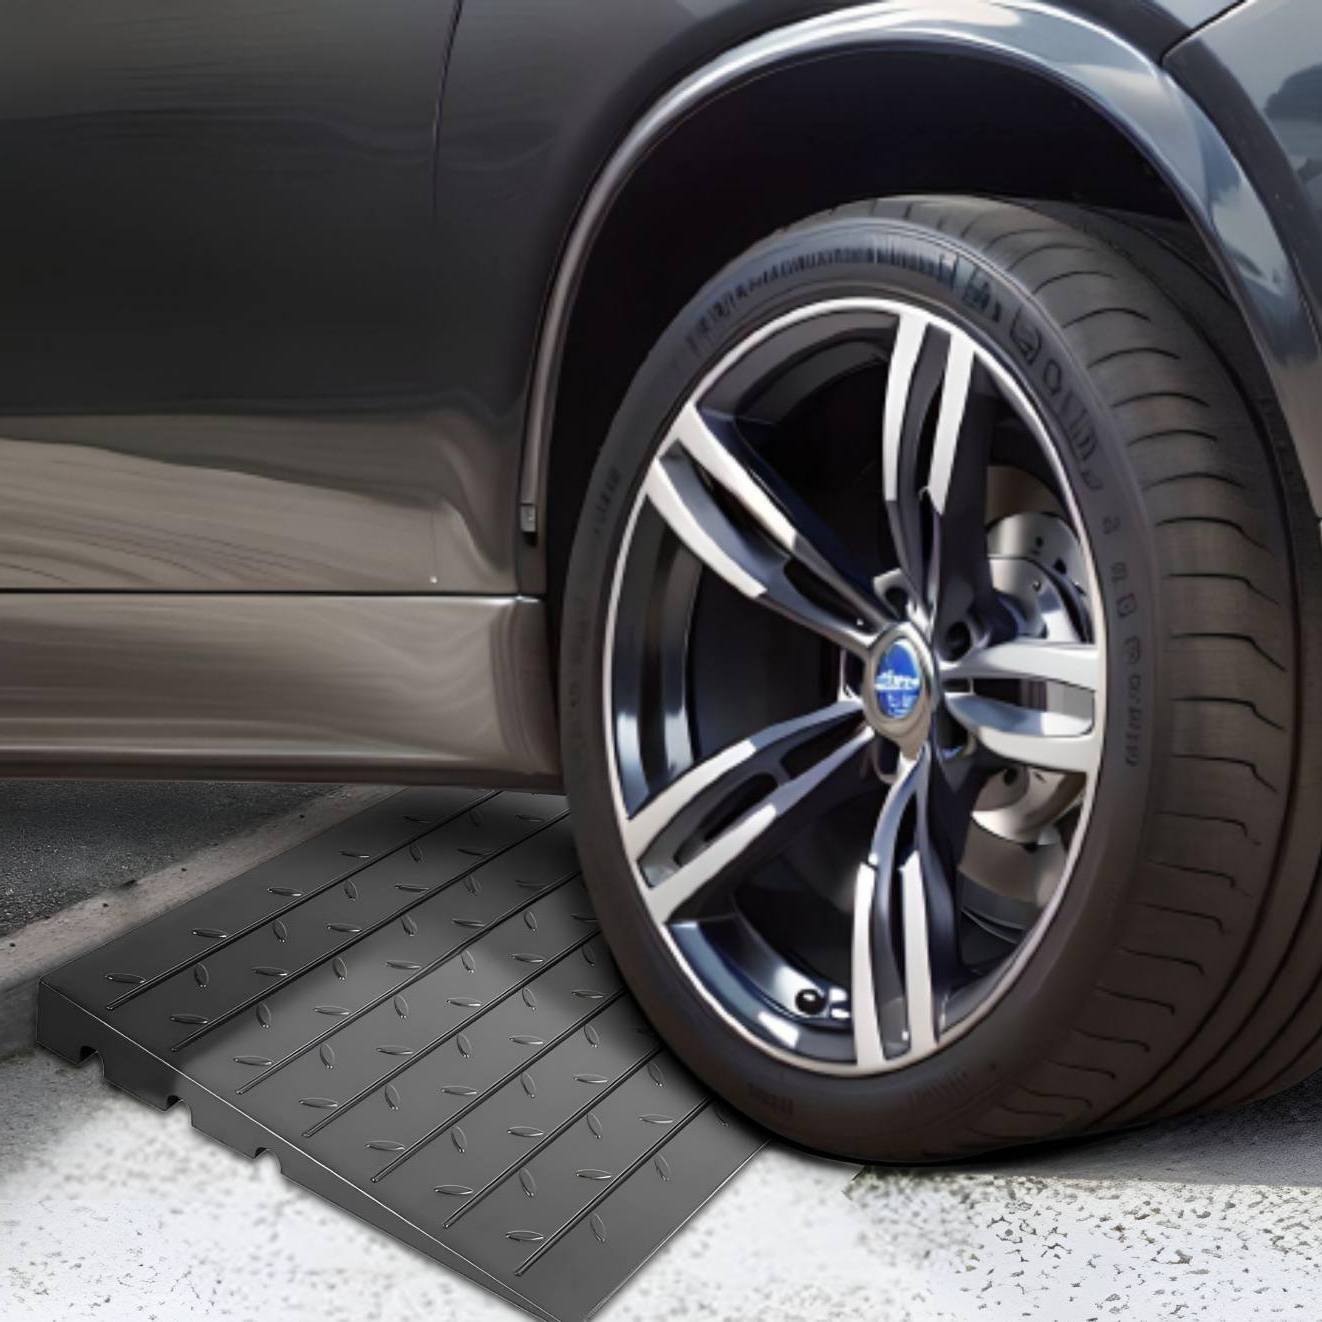 Dual-use ramp for seamless entry in driveways and commercial entries